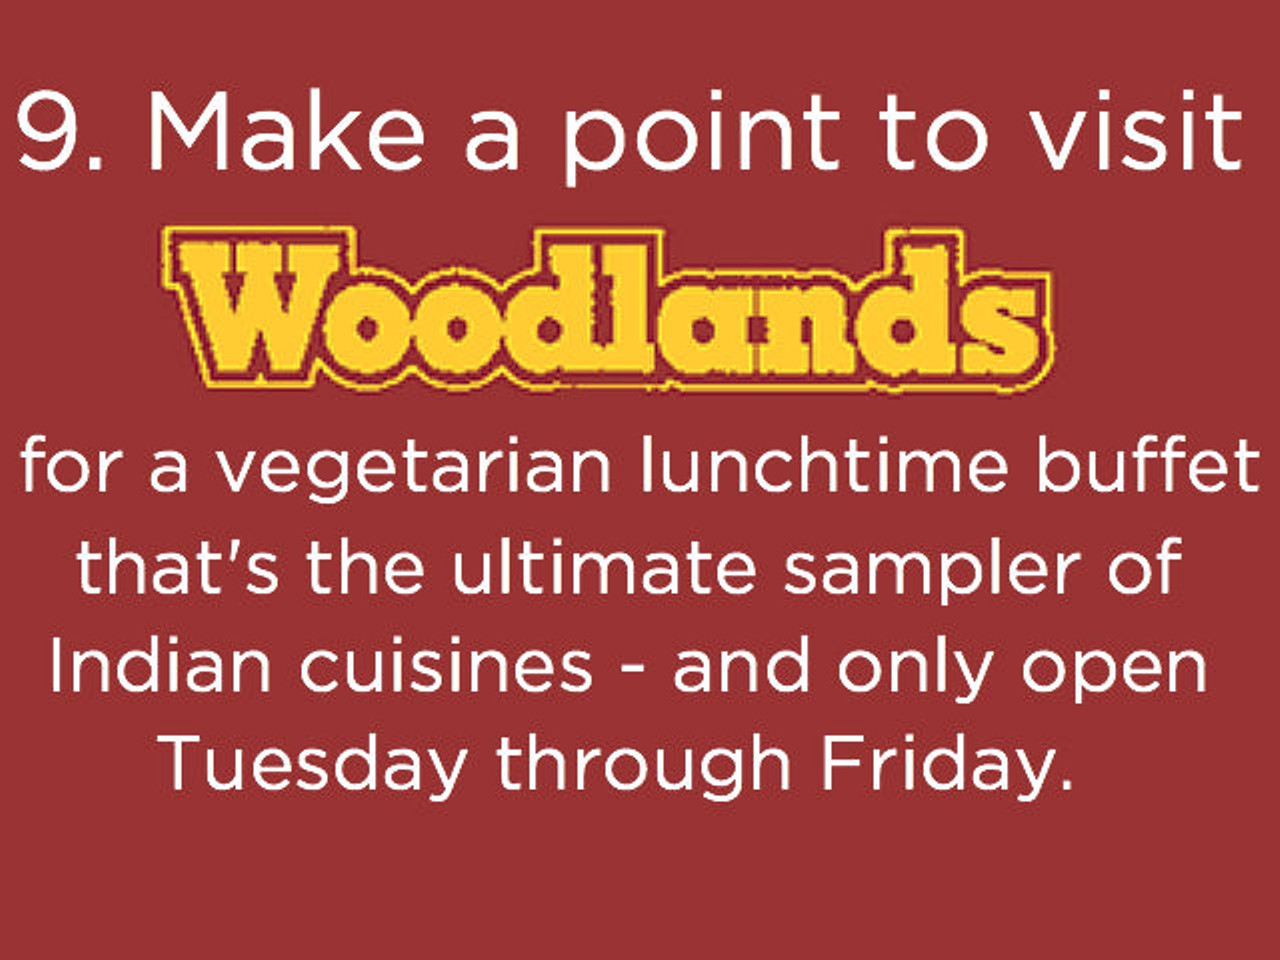 9. Visit Woodlands (6040 S. Orange Blossom Trail, woodlandsusa.com) for a vegetarian lunchtime buffet of delectable Indian dishes (only available Tuesday through Friday).